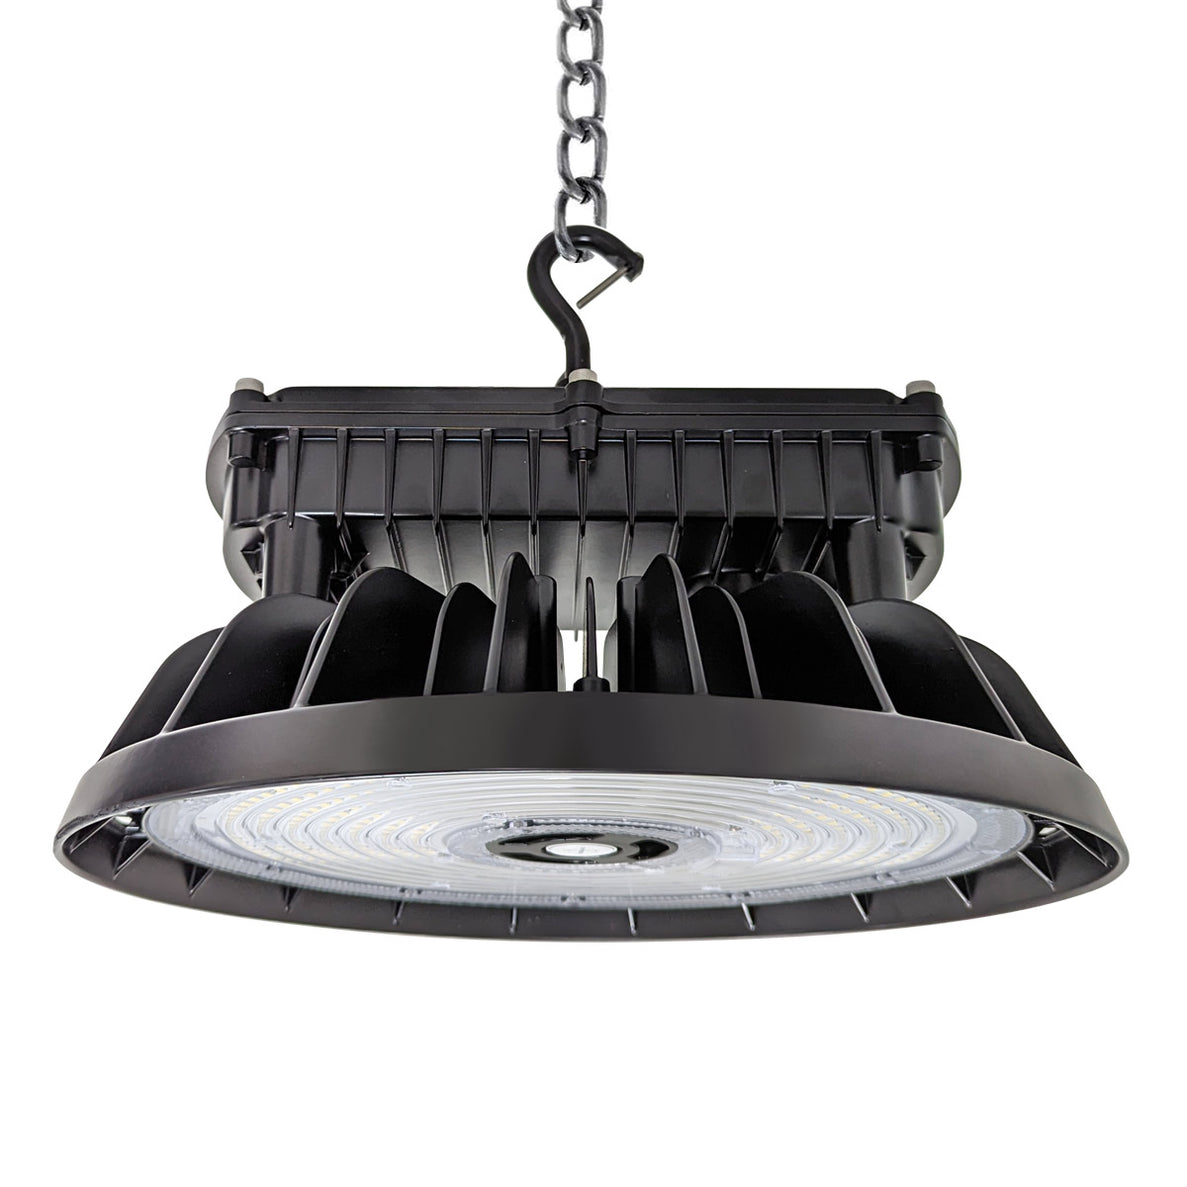 RHB04-310W Selectable High Lumen UFO LED High Bay - Up to 53,400 Lumens